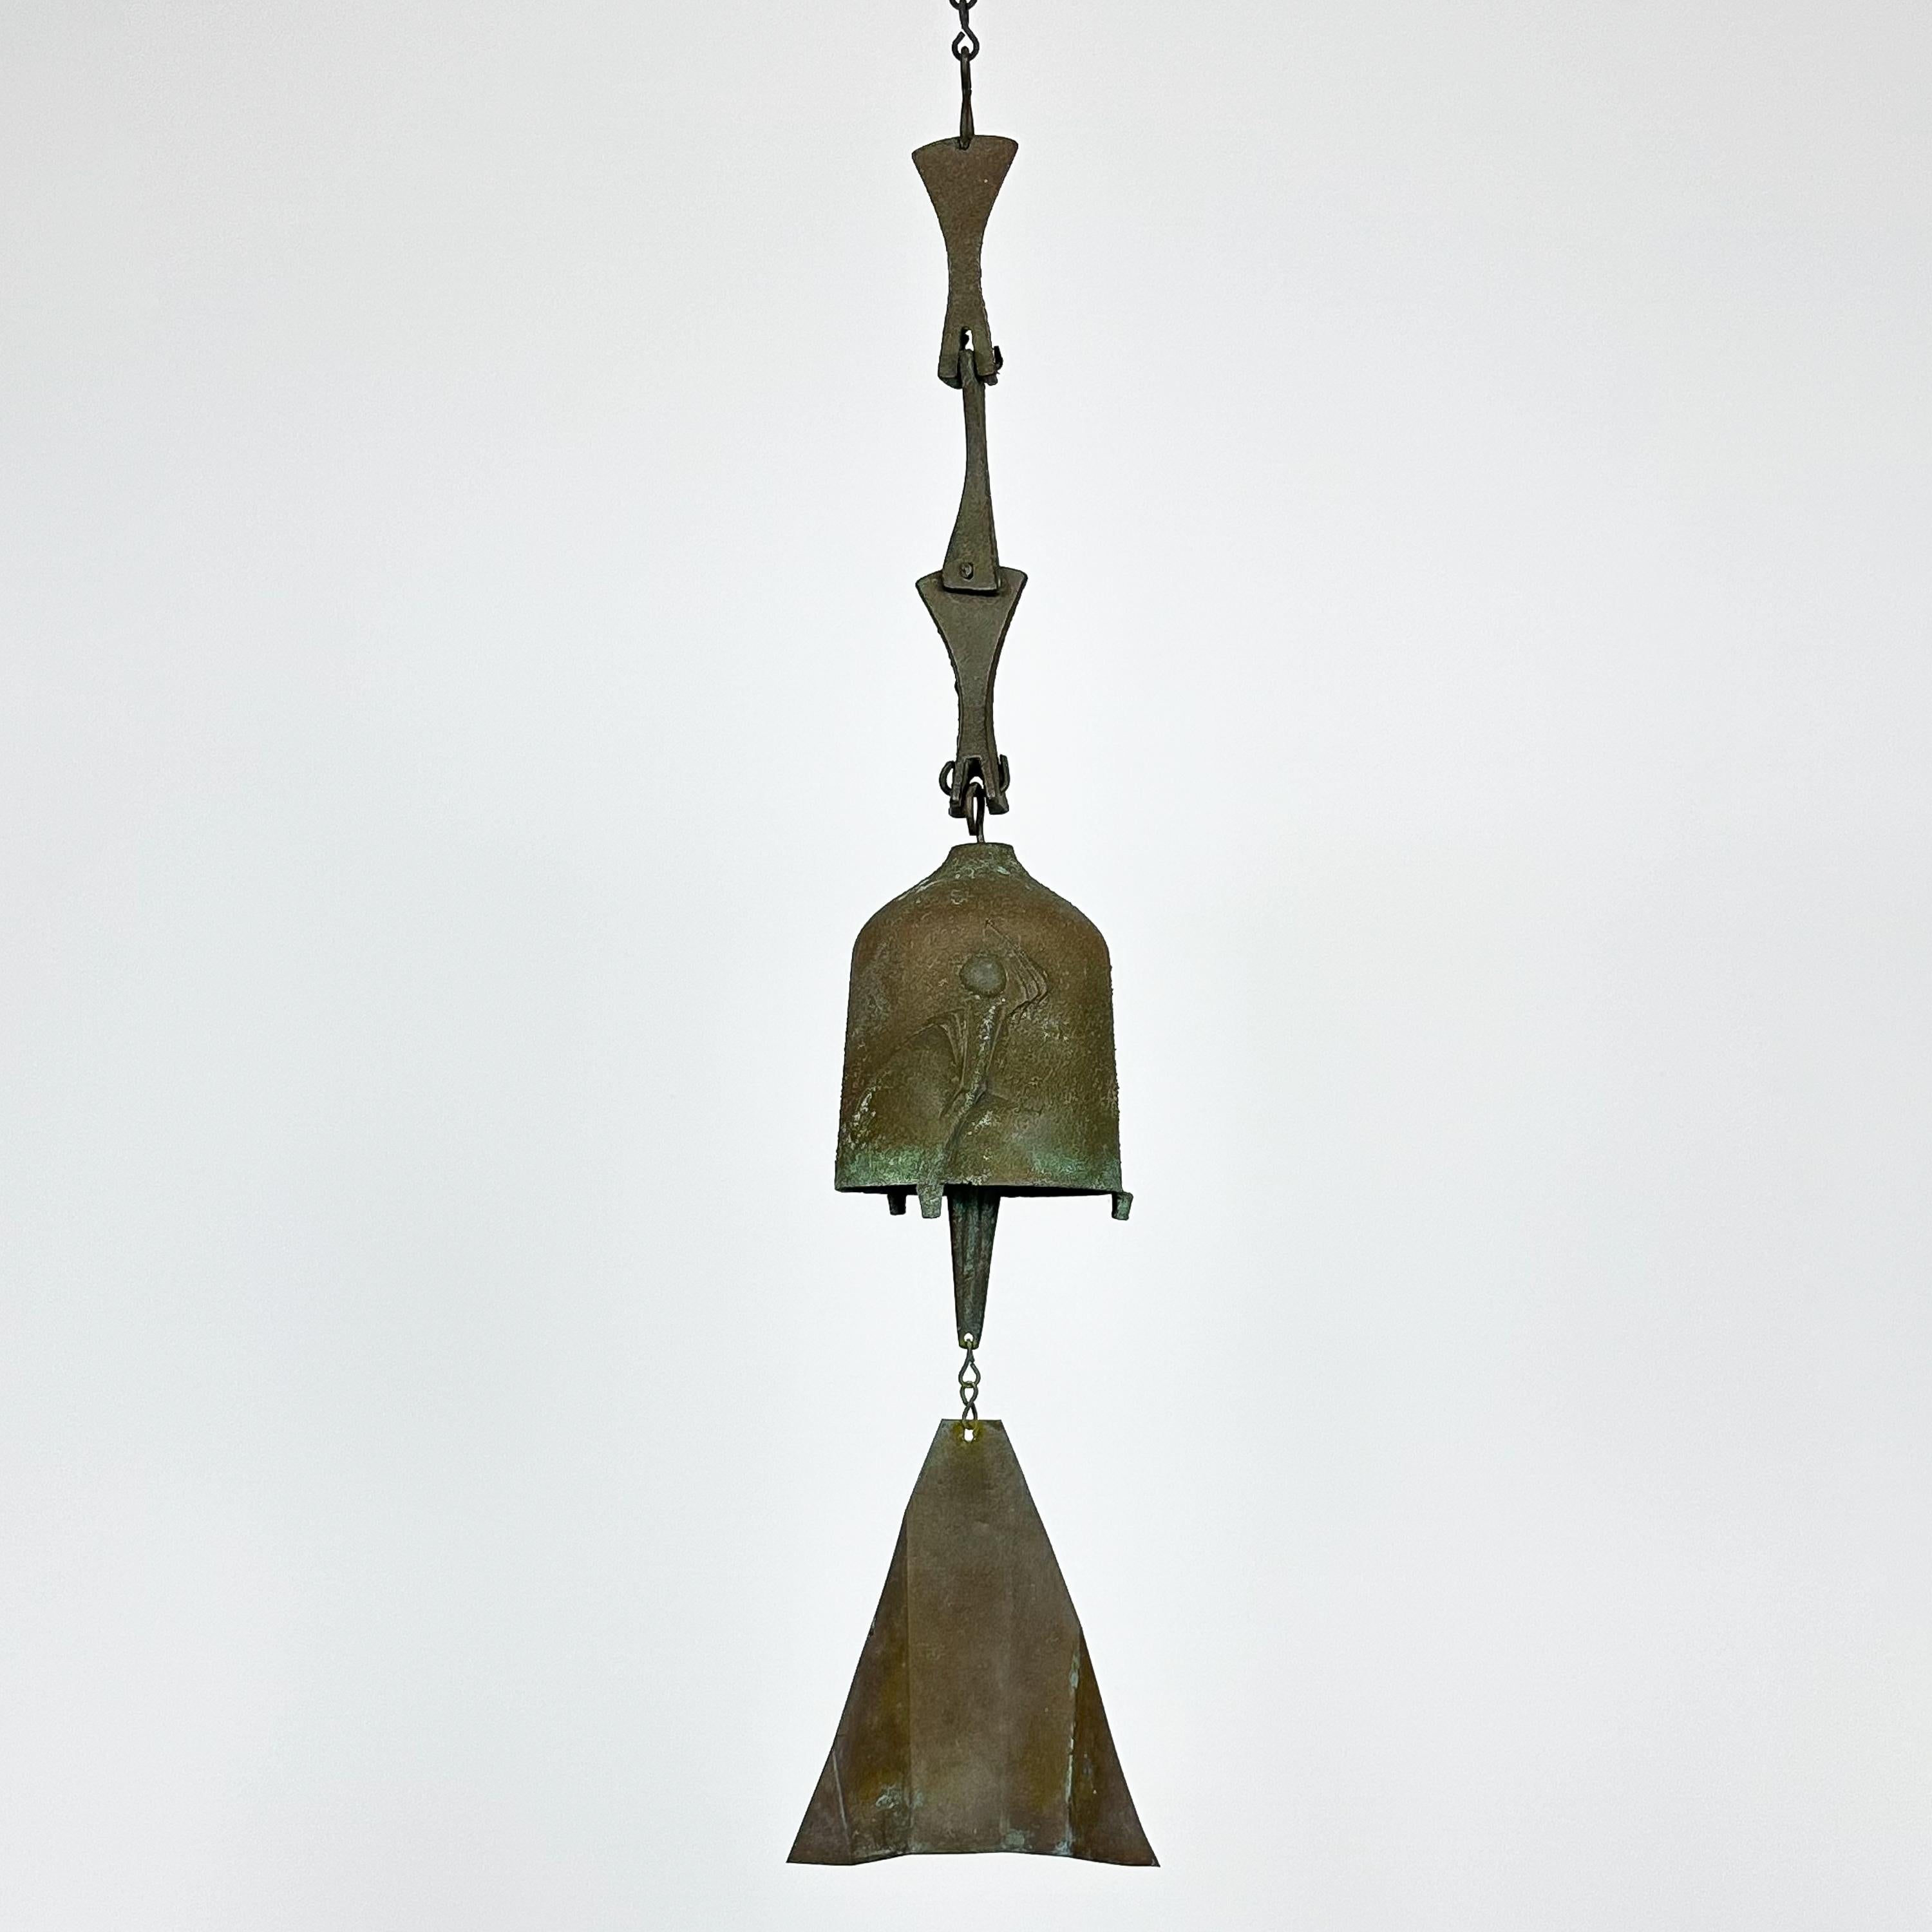 American Set of 3 Bronze Bells / Wind Chimes by Paolo Soleri for Arcosanti